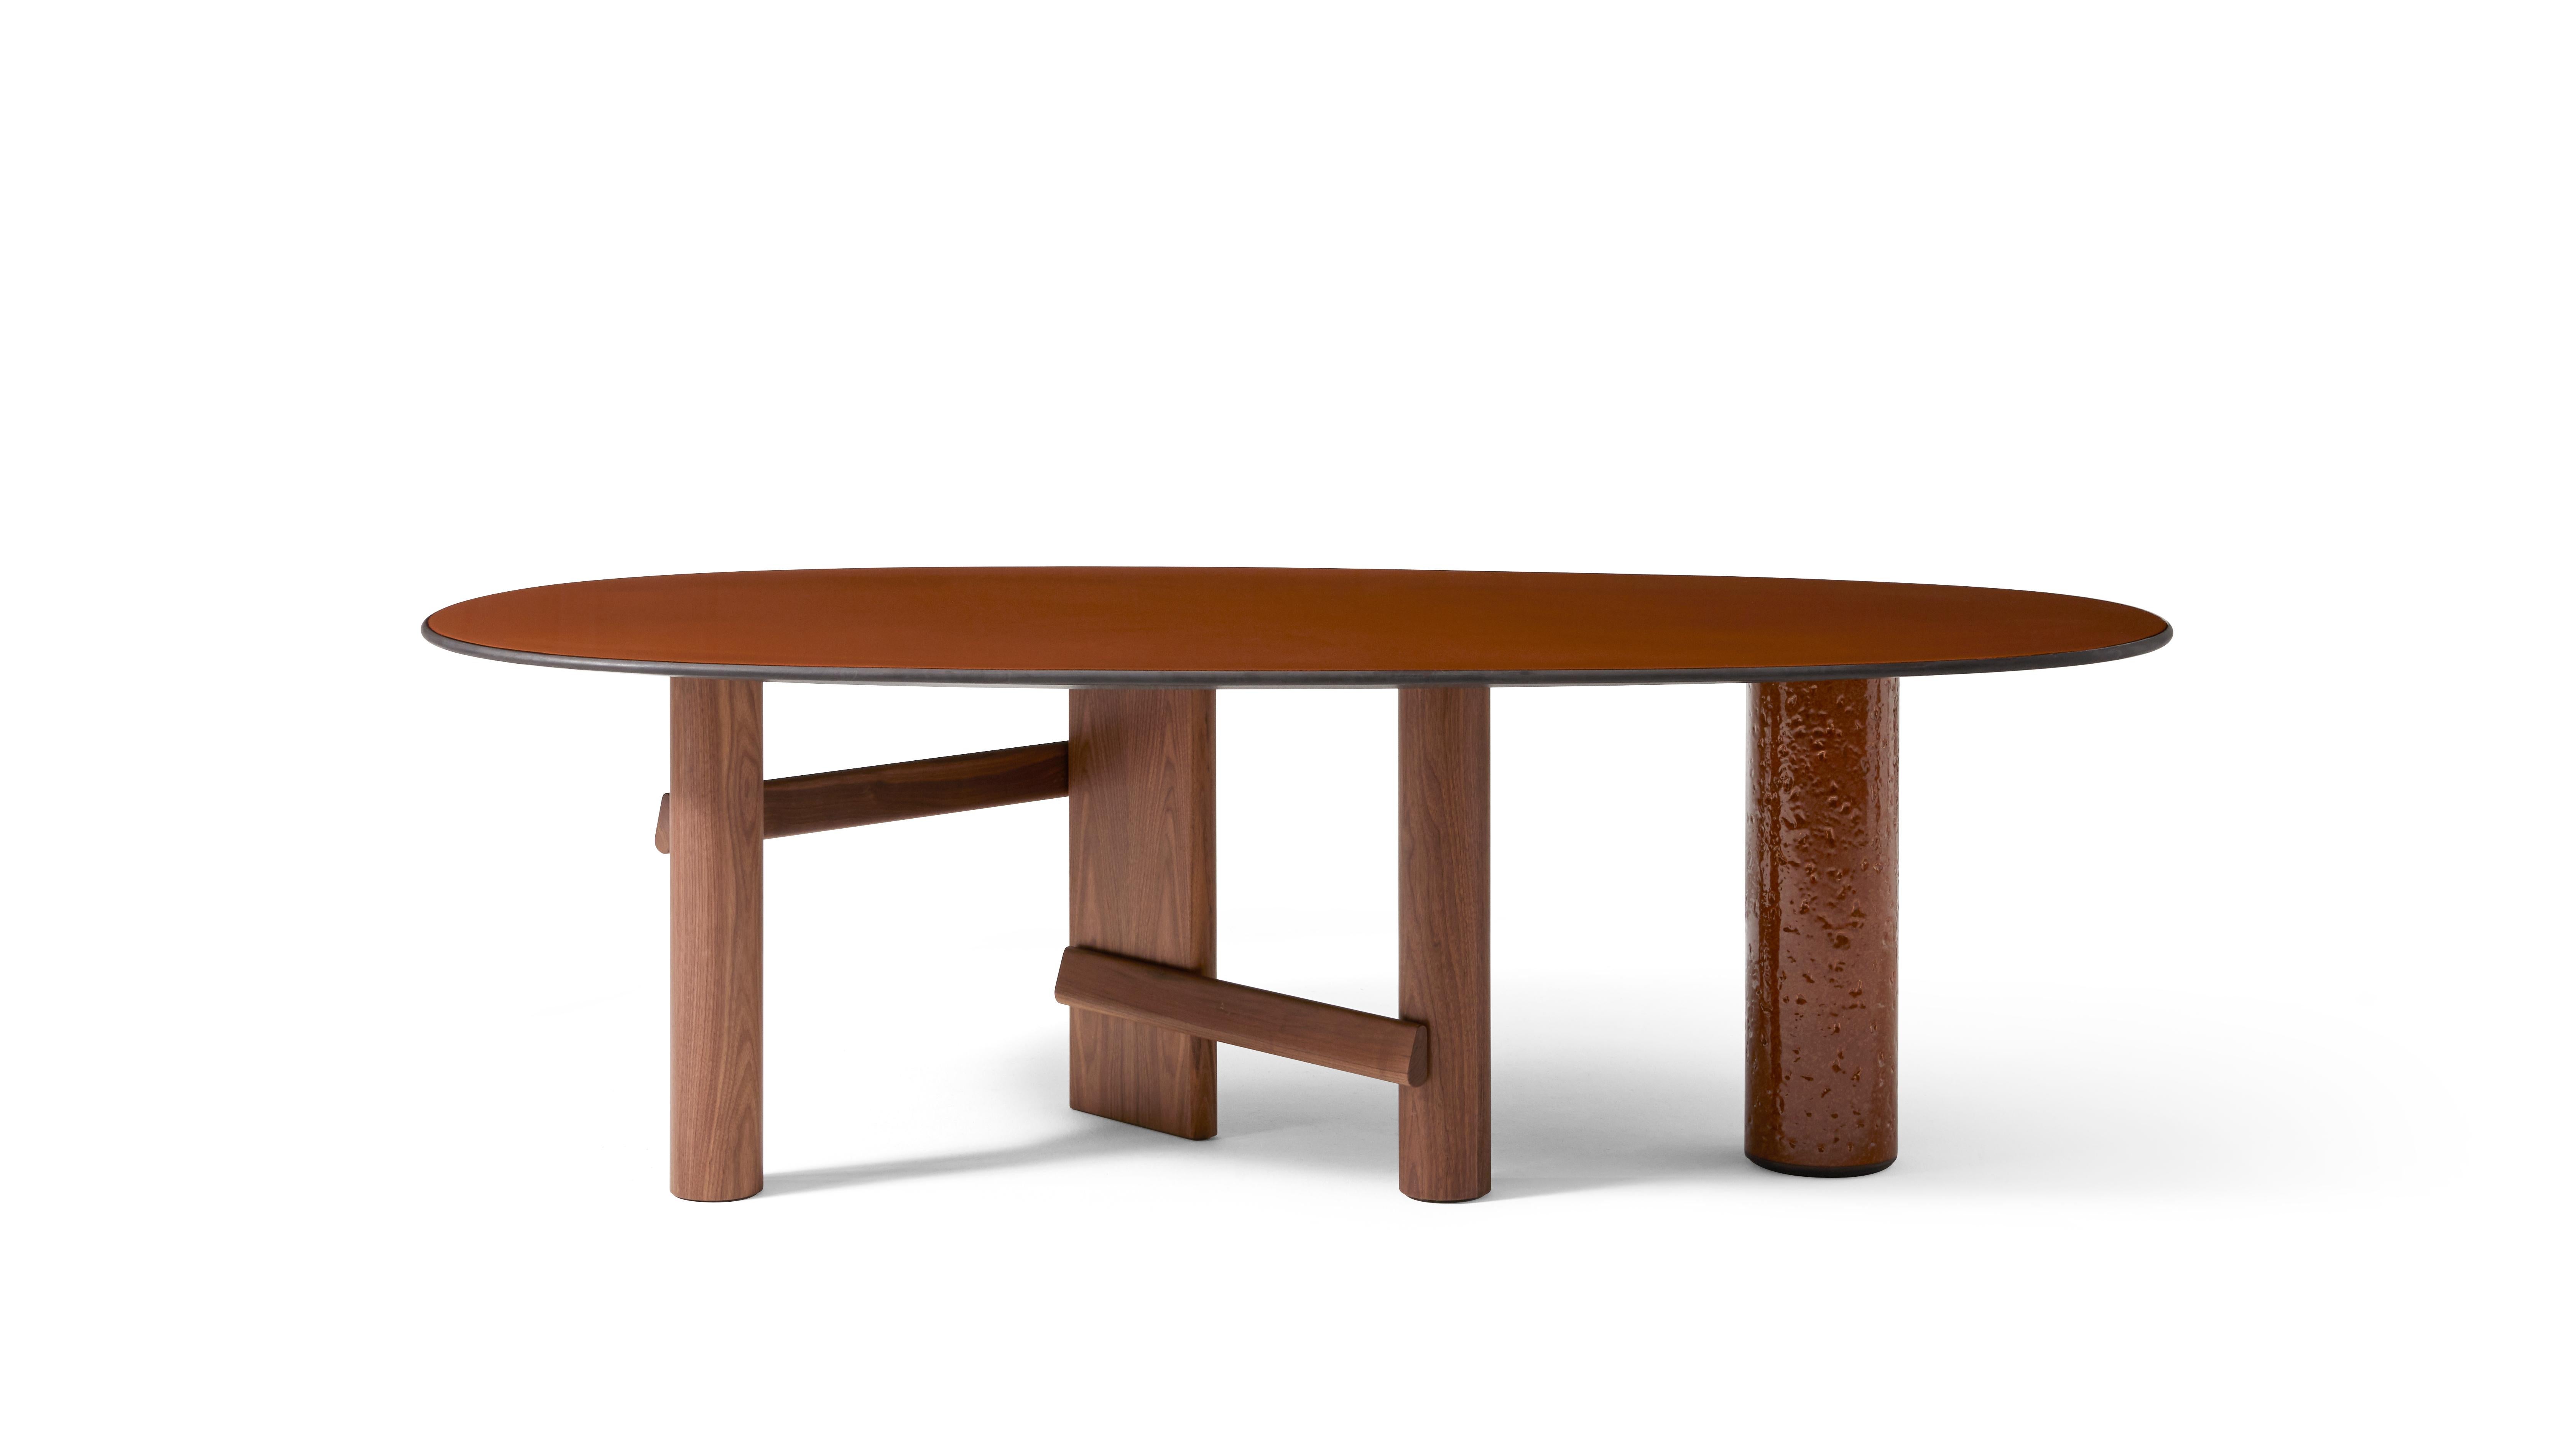 Sculptural Sengu Dining Table by Patricia Urquiola for Cassina In New Condition For Sale In Barcelona, Barcelona